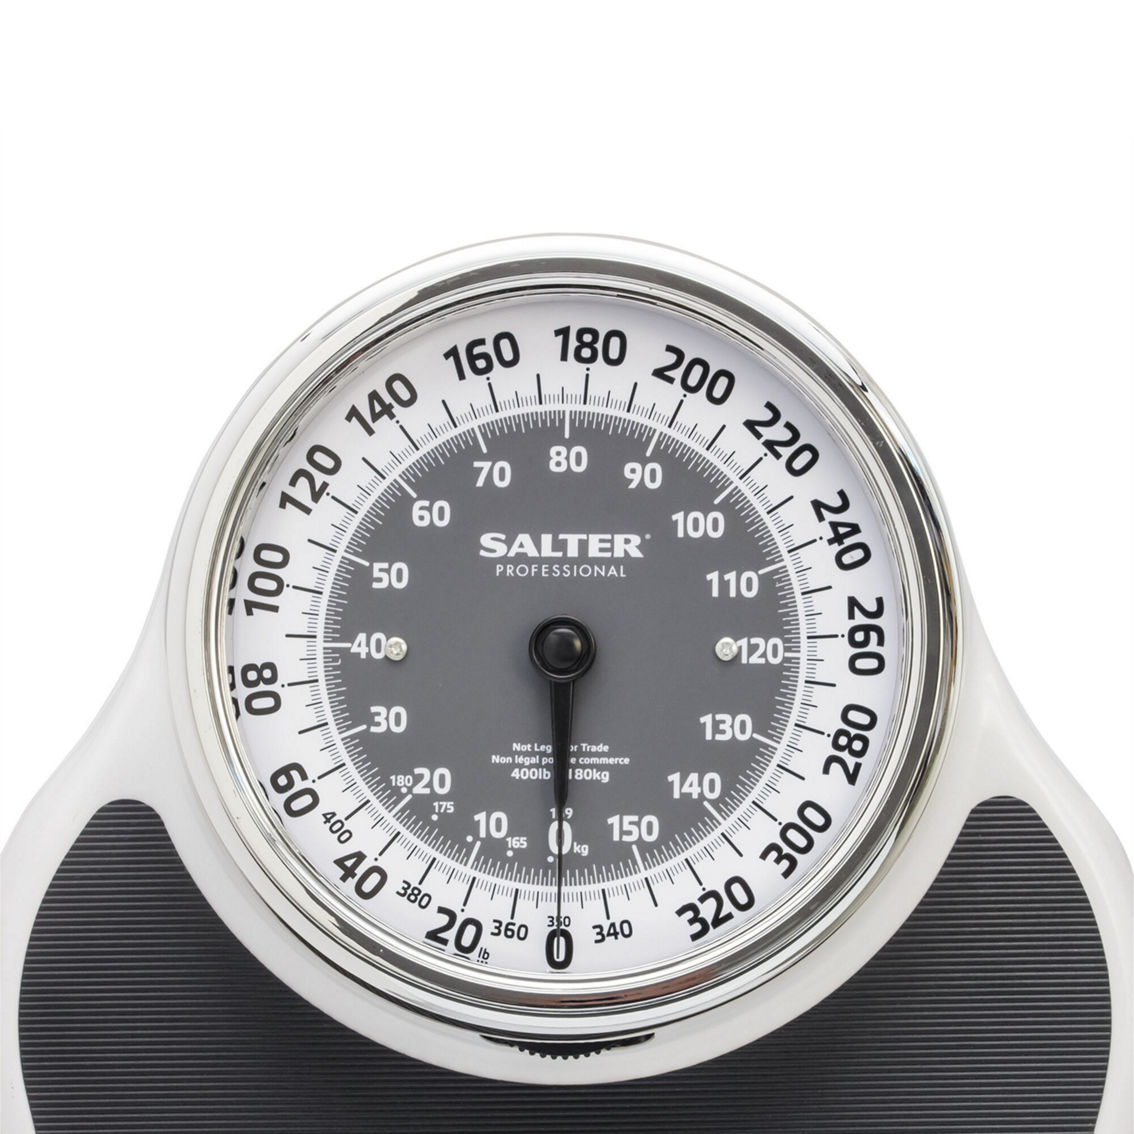 Salter Analog Dial Scale, Black - Image 2 of 4